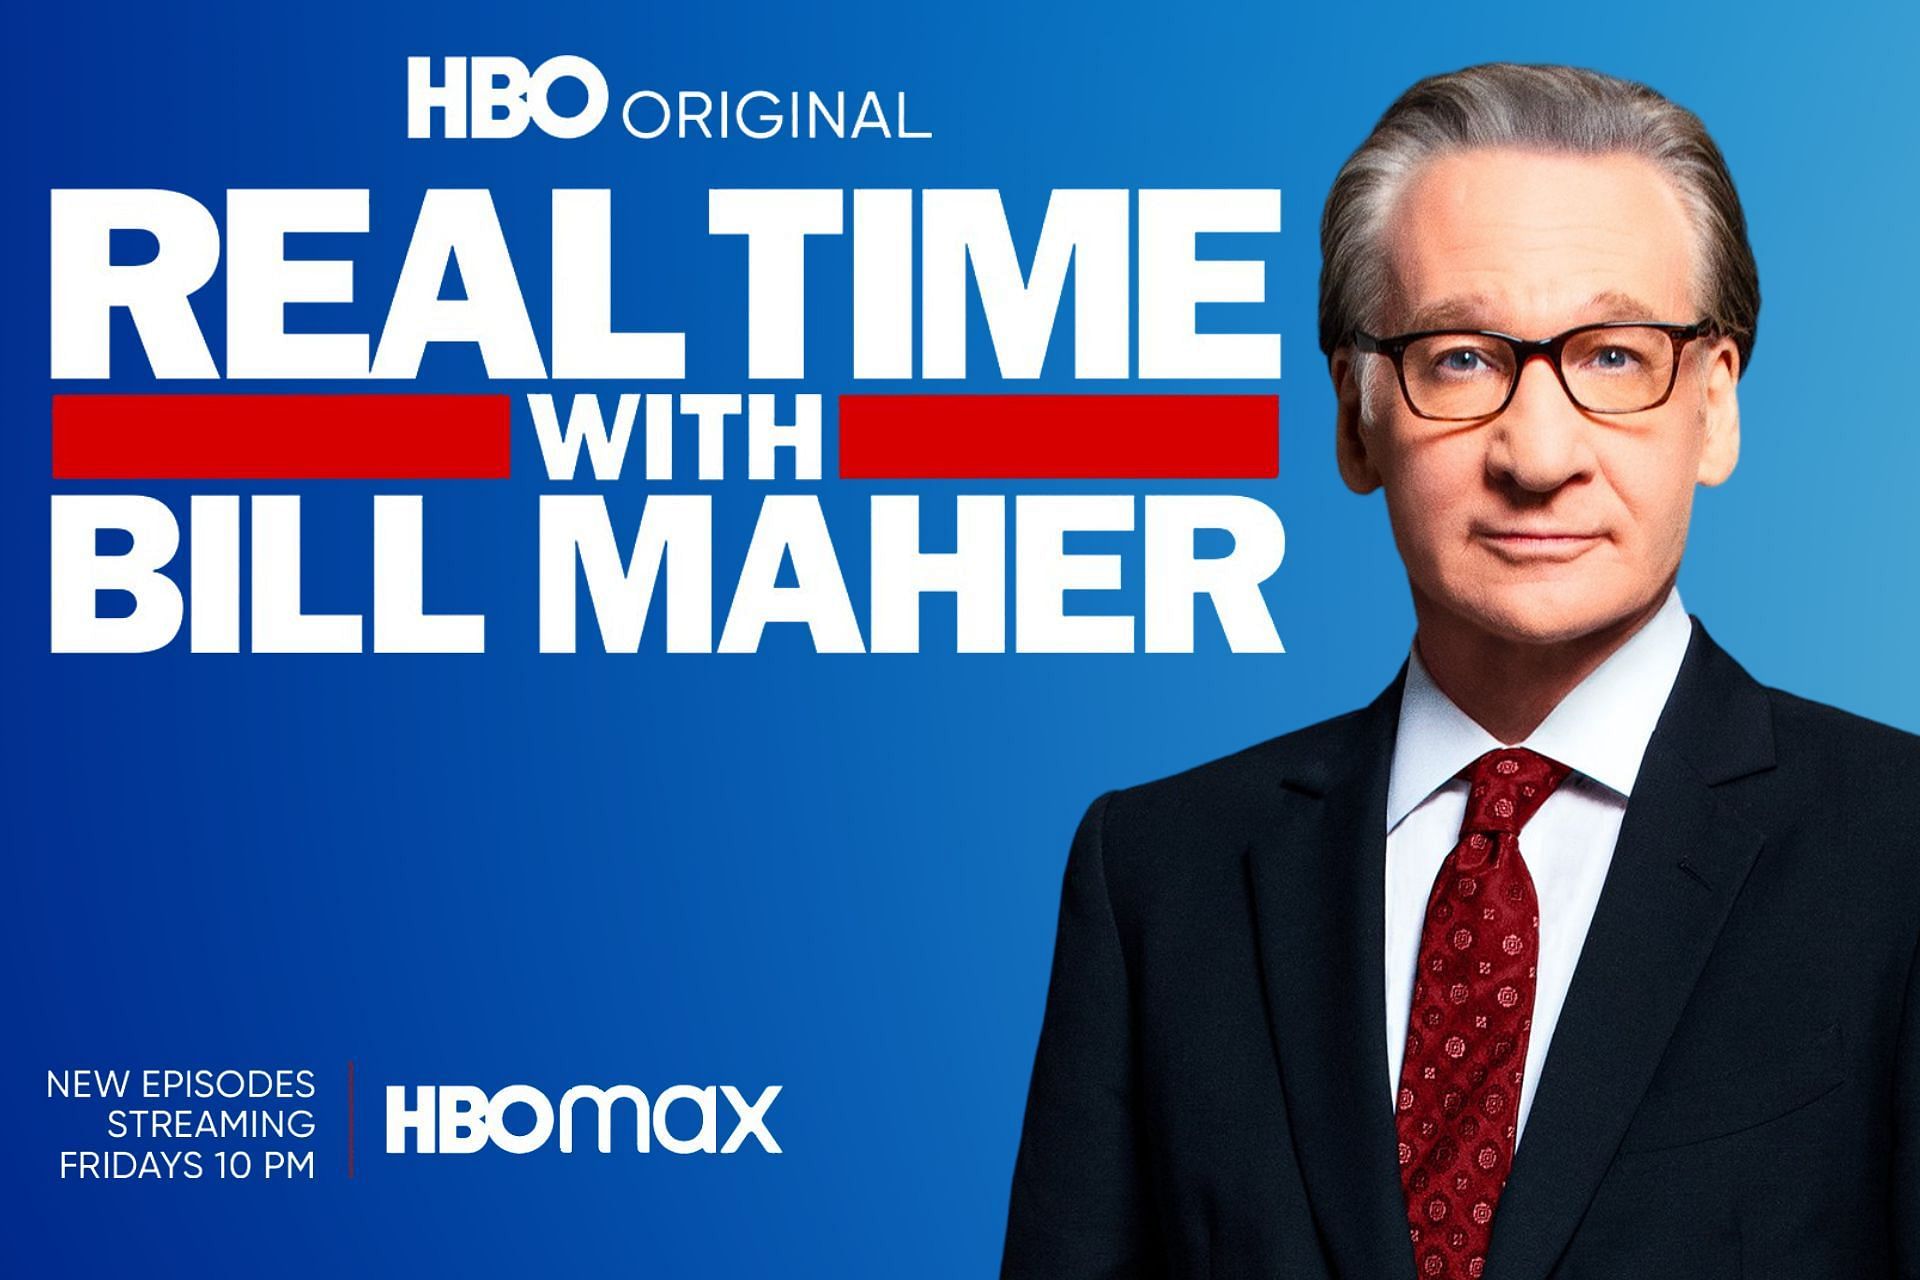 Real Time With Bill Maher episode 5 HBO reveals starstudded guest